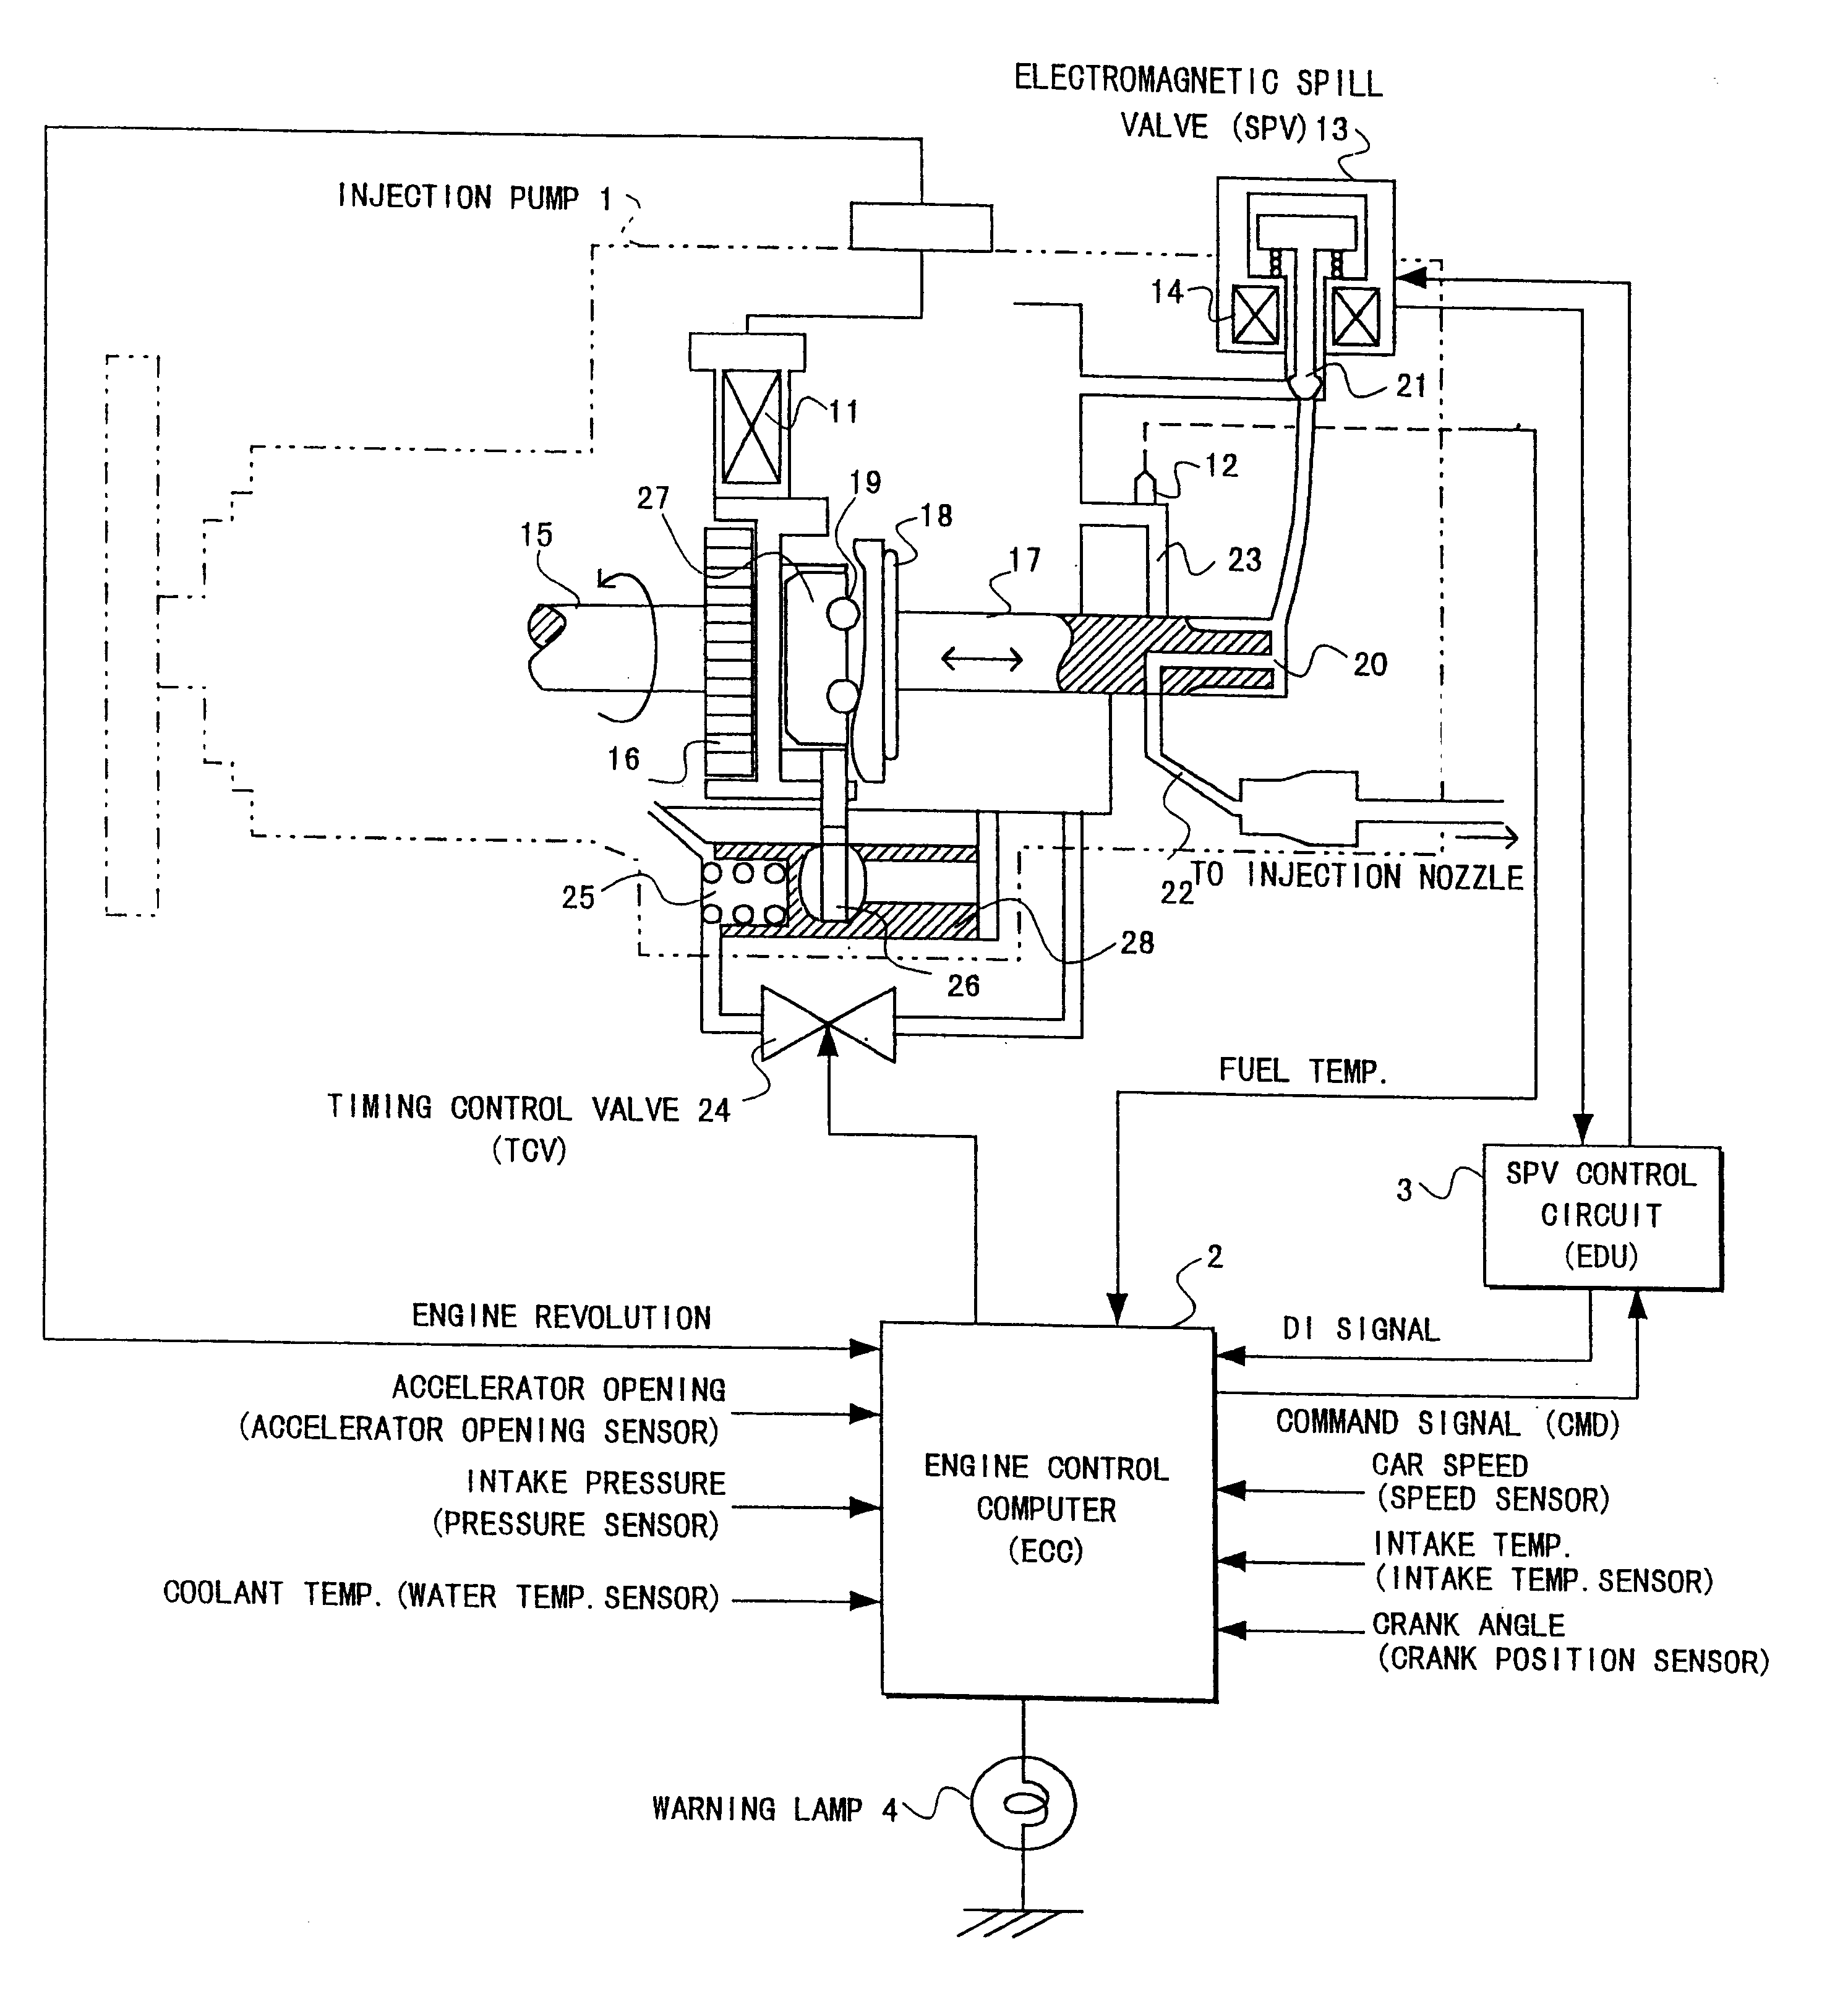 Electronic fuel injection apparatus